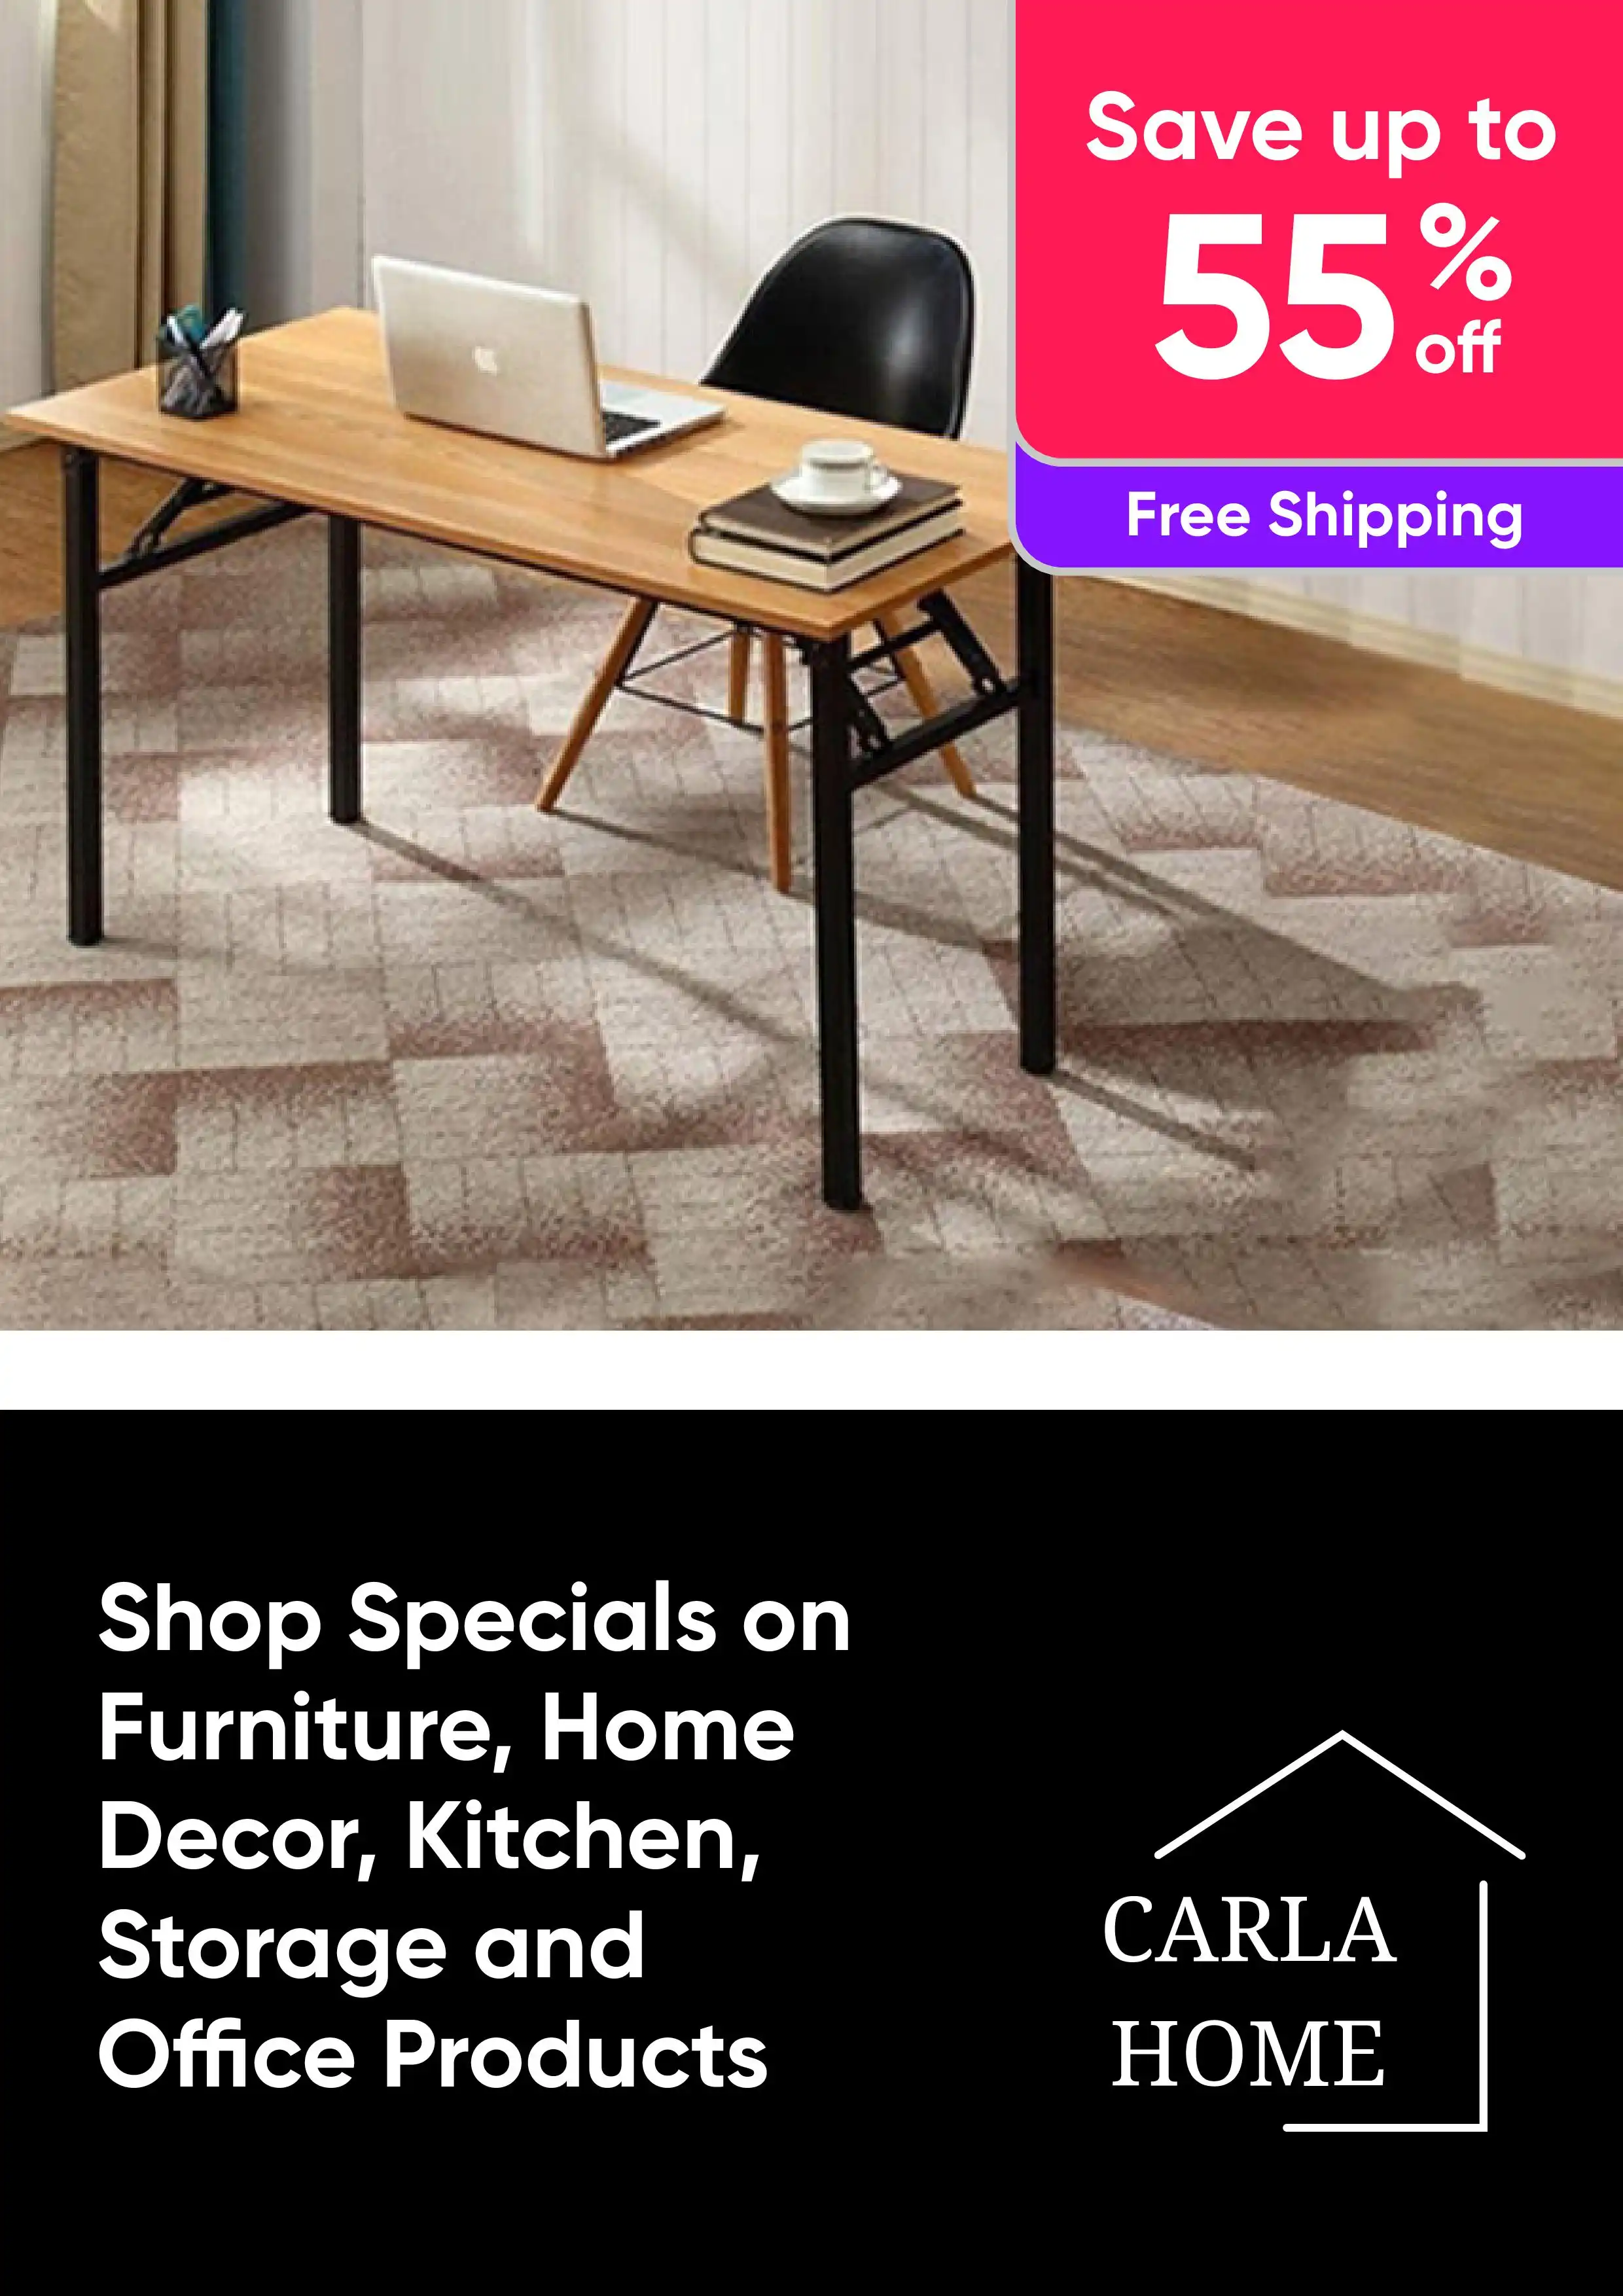 Shop Specials on Furniture, Home Decor, Kitchen, Storage and Office Products - Save Up To 50% Off